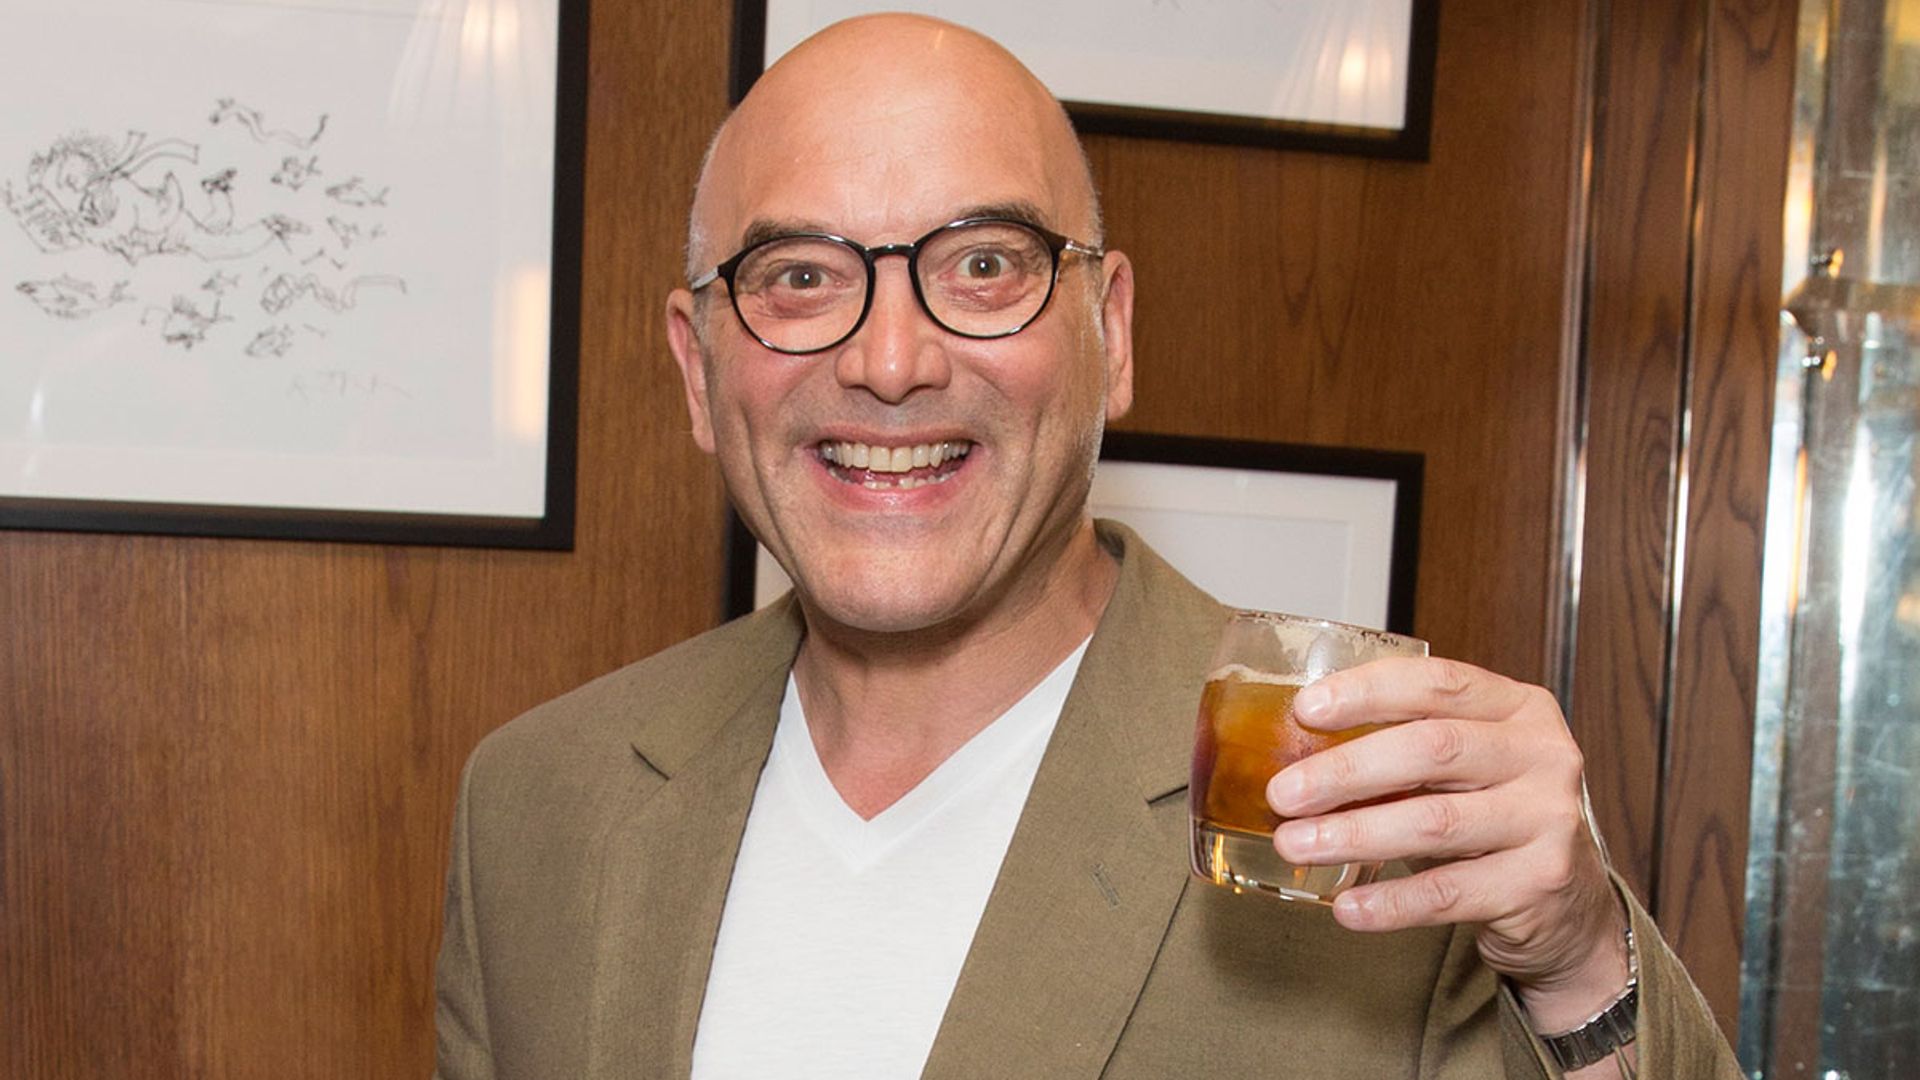 Masterchef Judge Gregg Wallace Shows Off The Results Of His Three Stone Weight Loss Hello